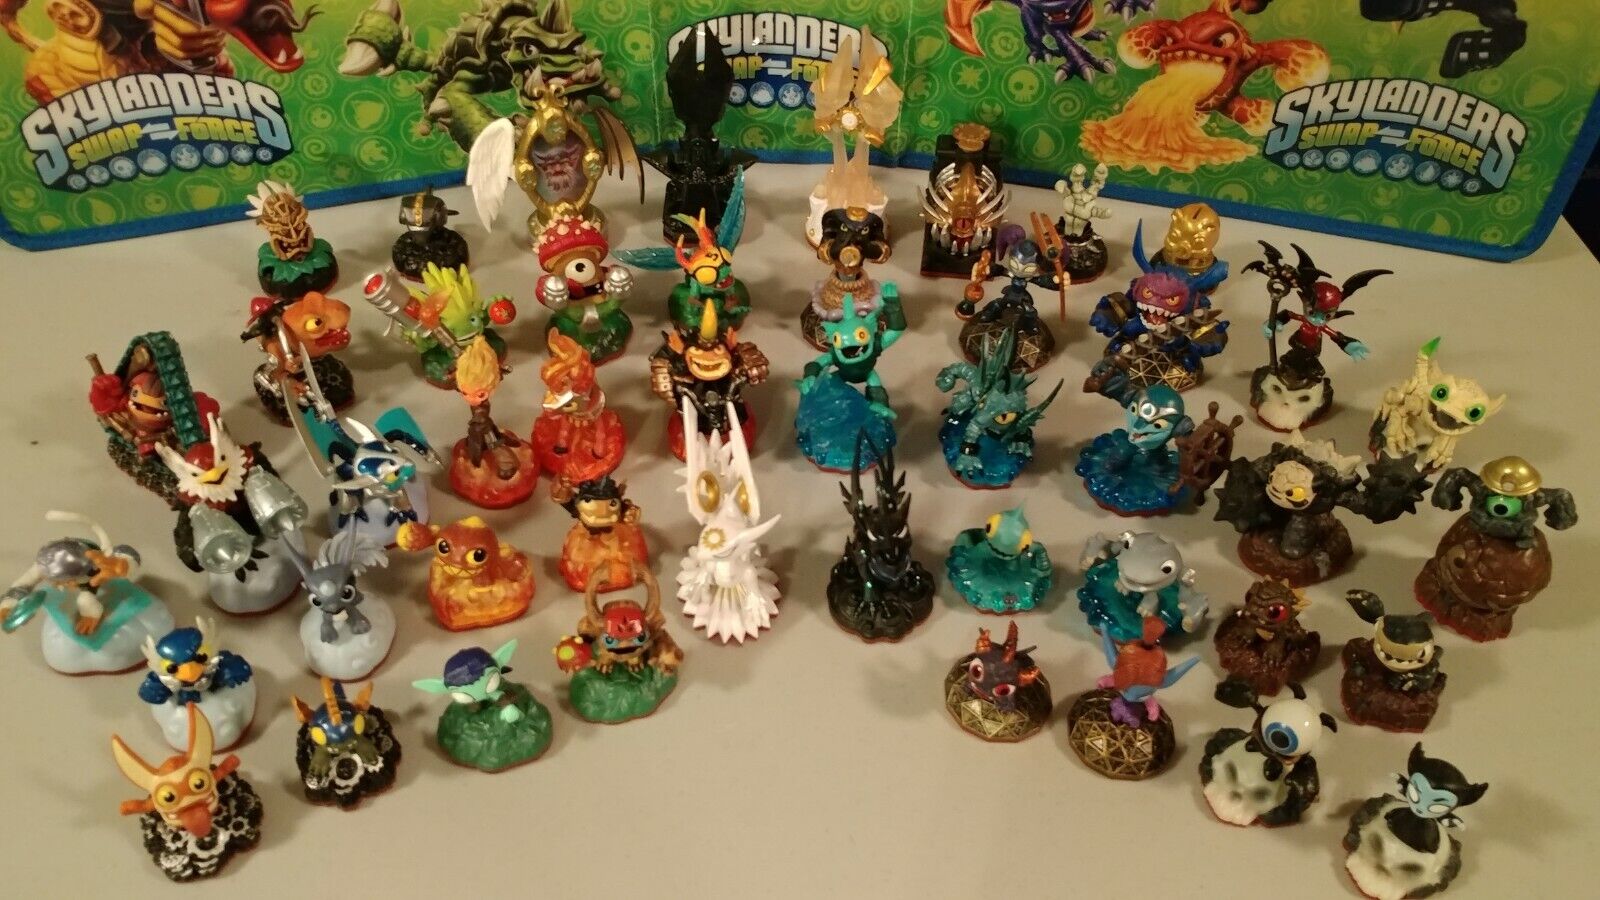 Skylanders TRAP TEAM COMPLETE YOUR COLLECTION Buy 3 get 1 Free! *$6 Minimum*🎼